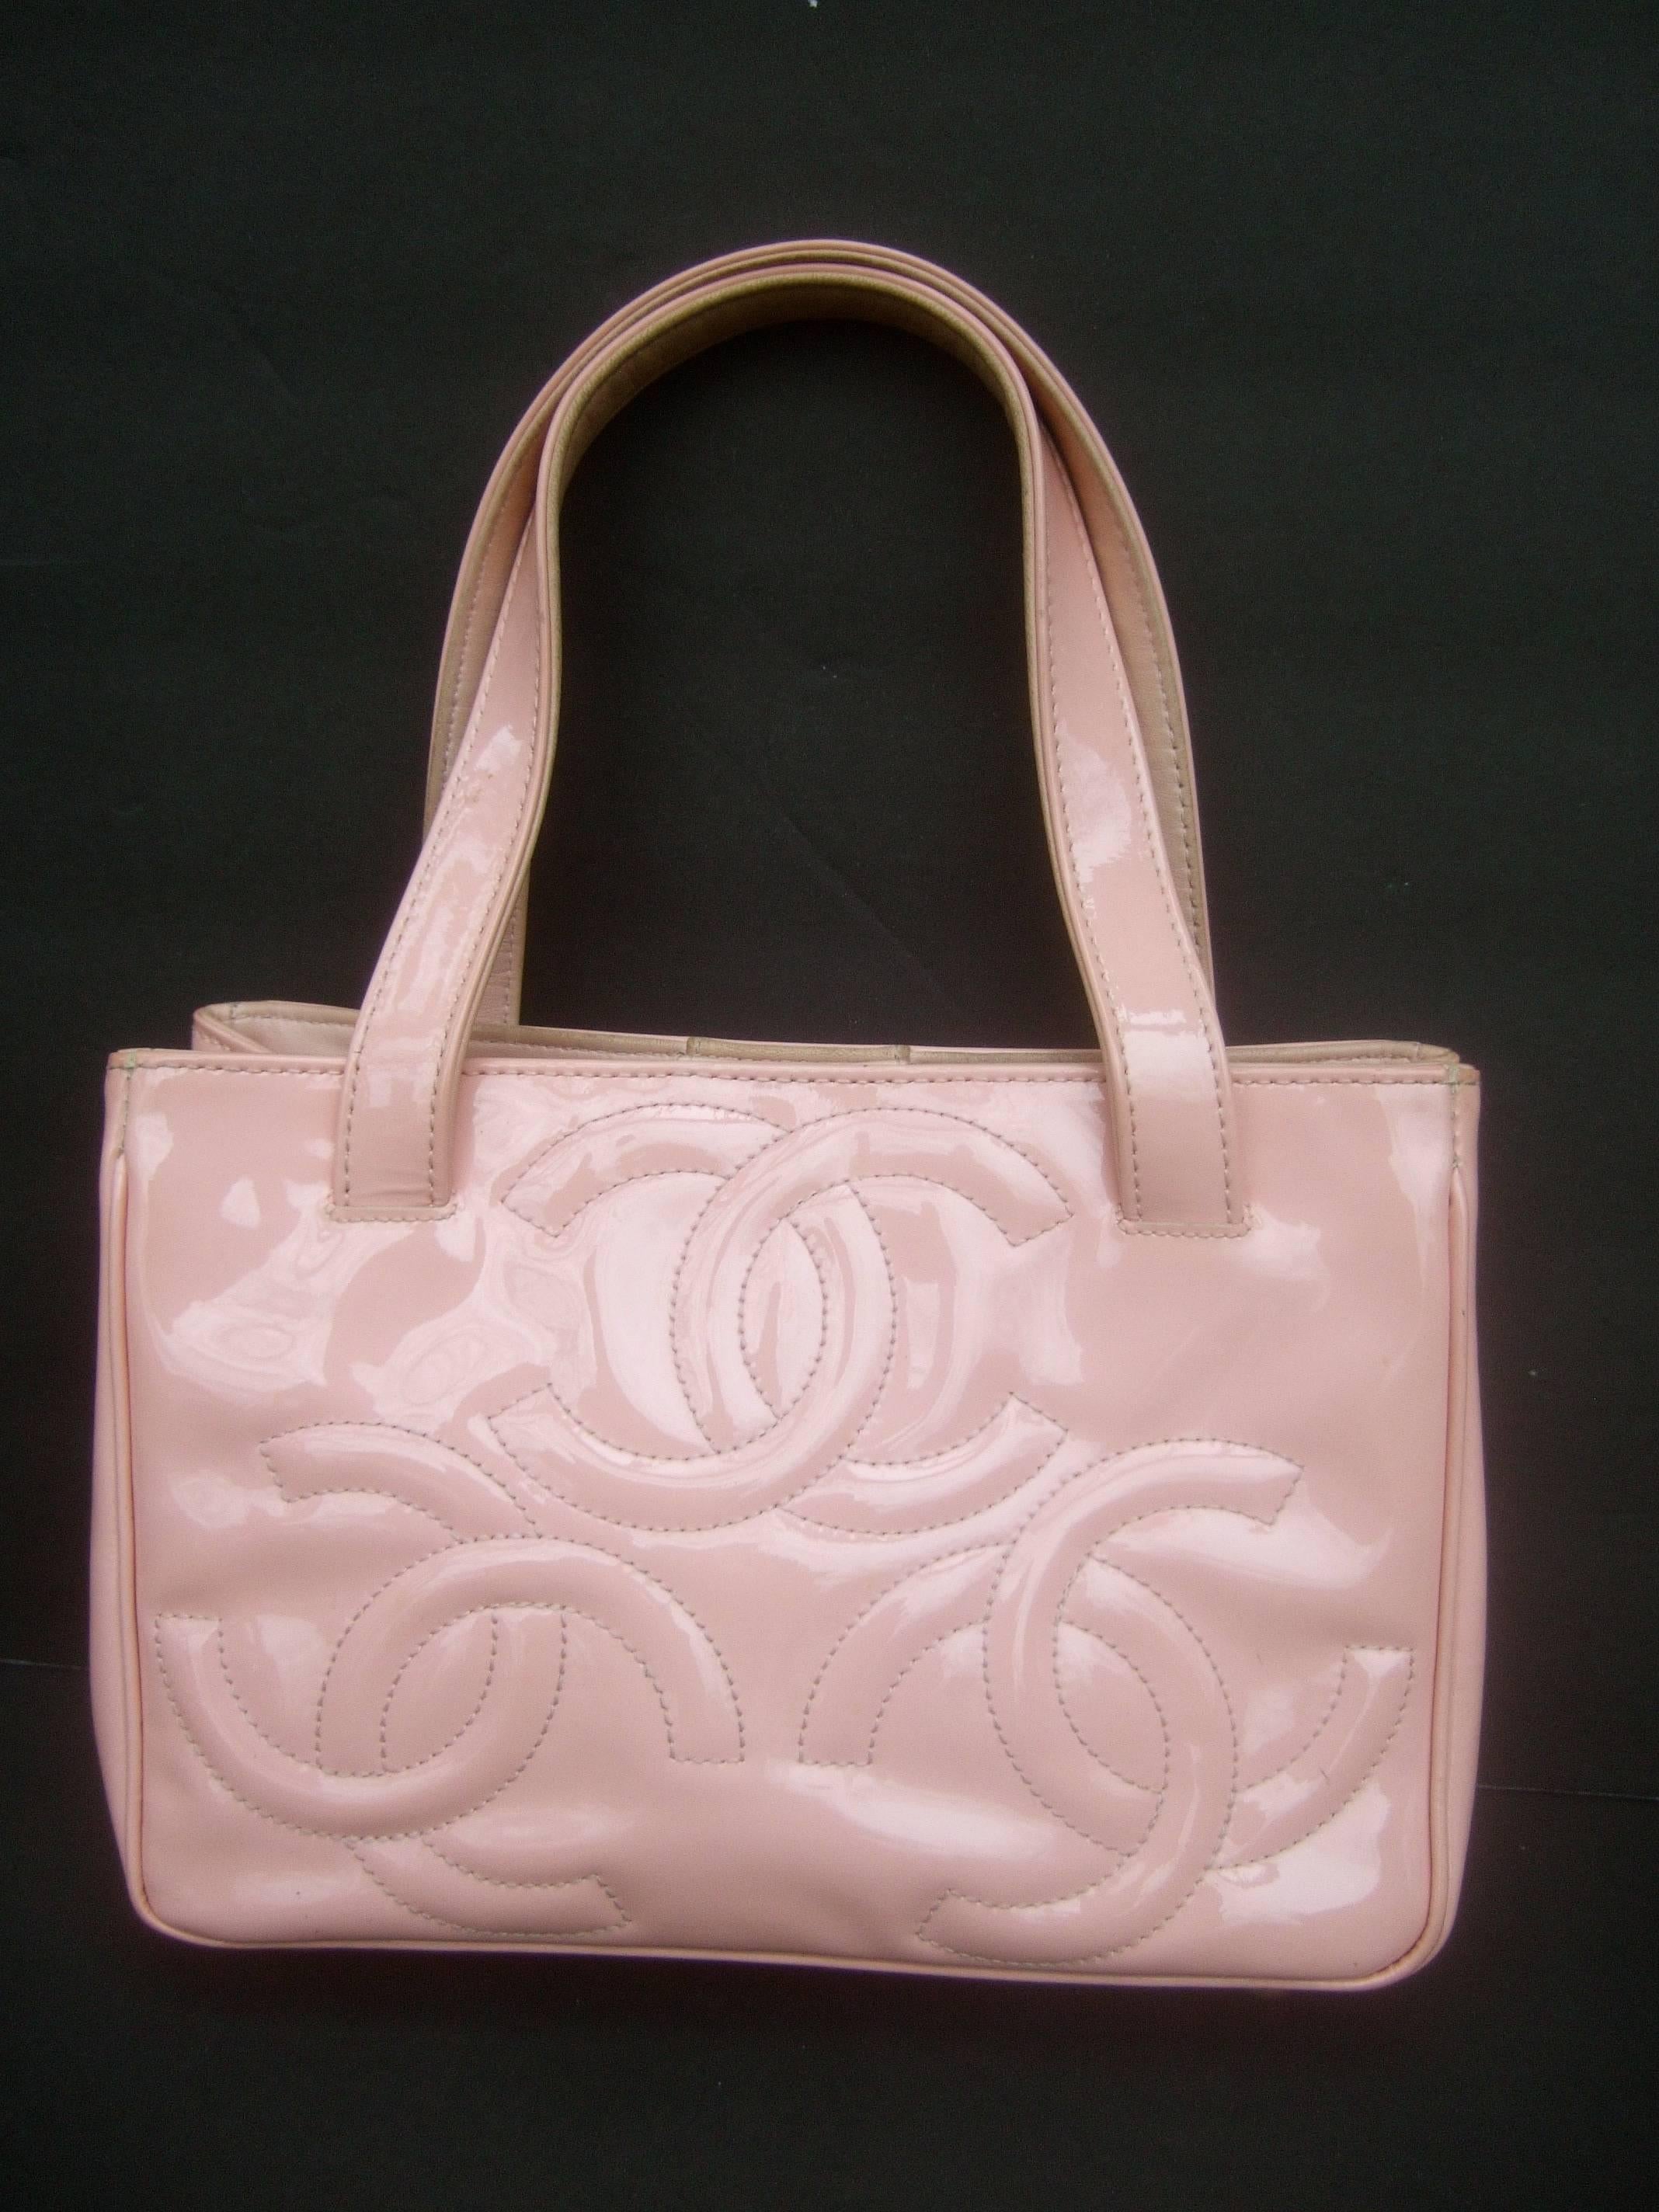 Chanel pink patent leather handbag in Shabby Chic AS IS Condition 
The pale pink patent leather handbag is designed with three sets
of Chanel's iconic large scale initials on both exterior sides

One of the exterior sides has several darkened spots